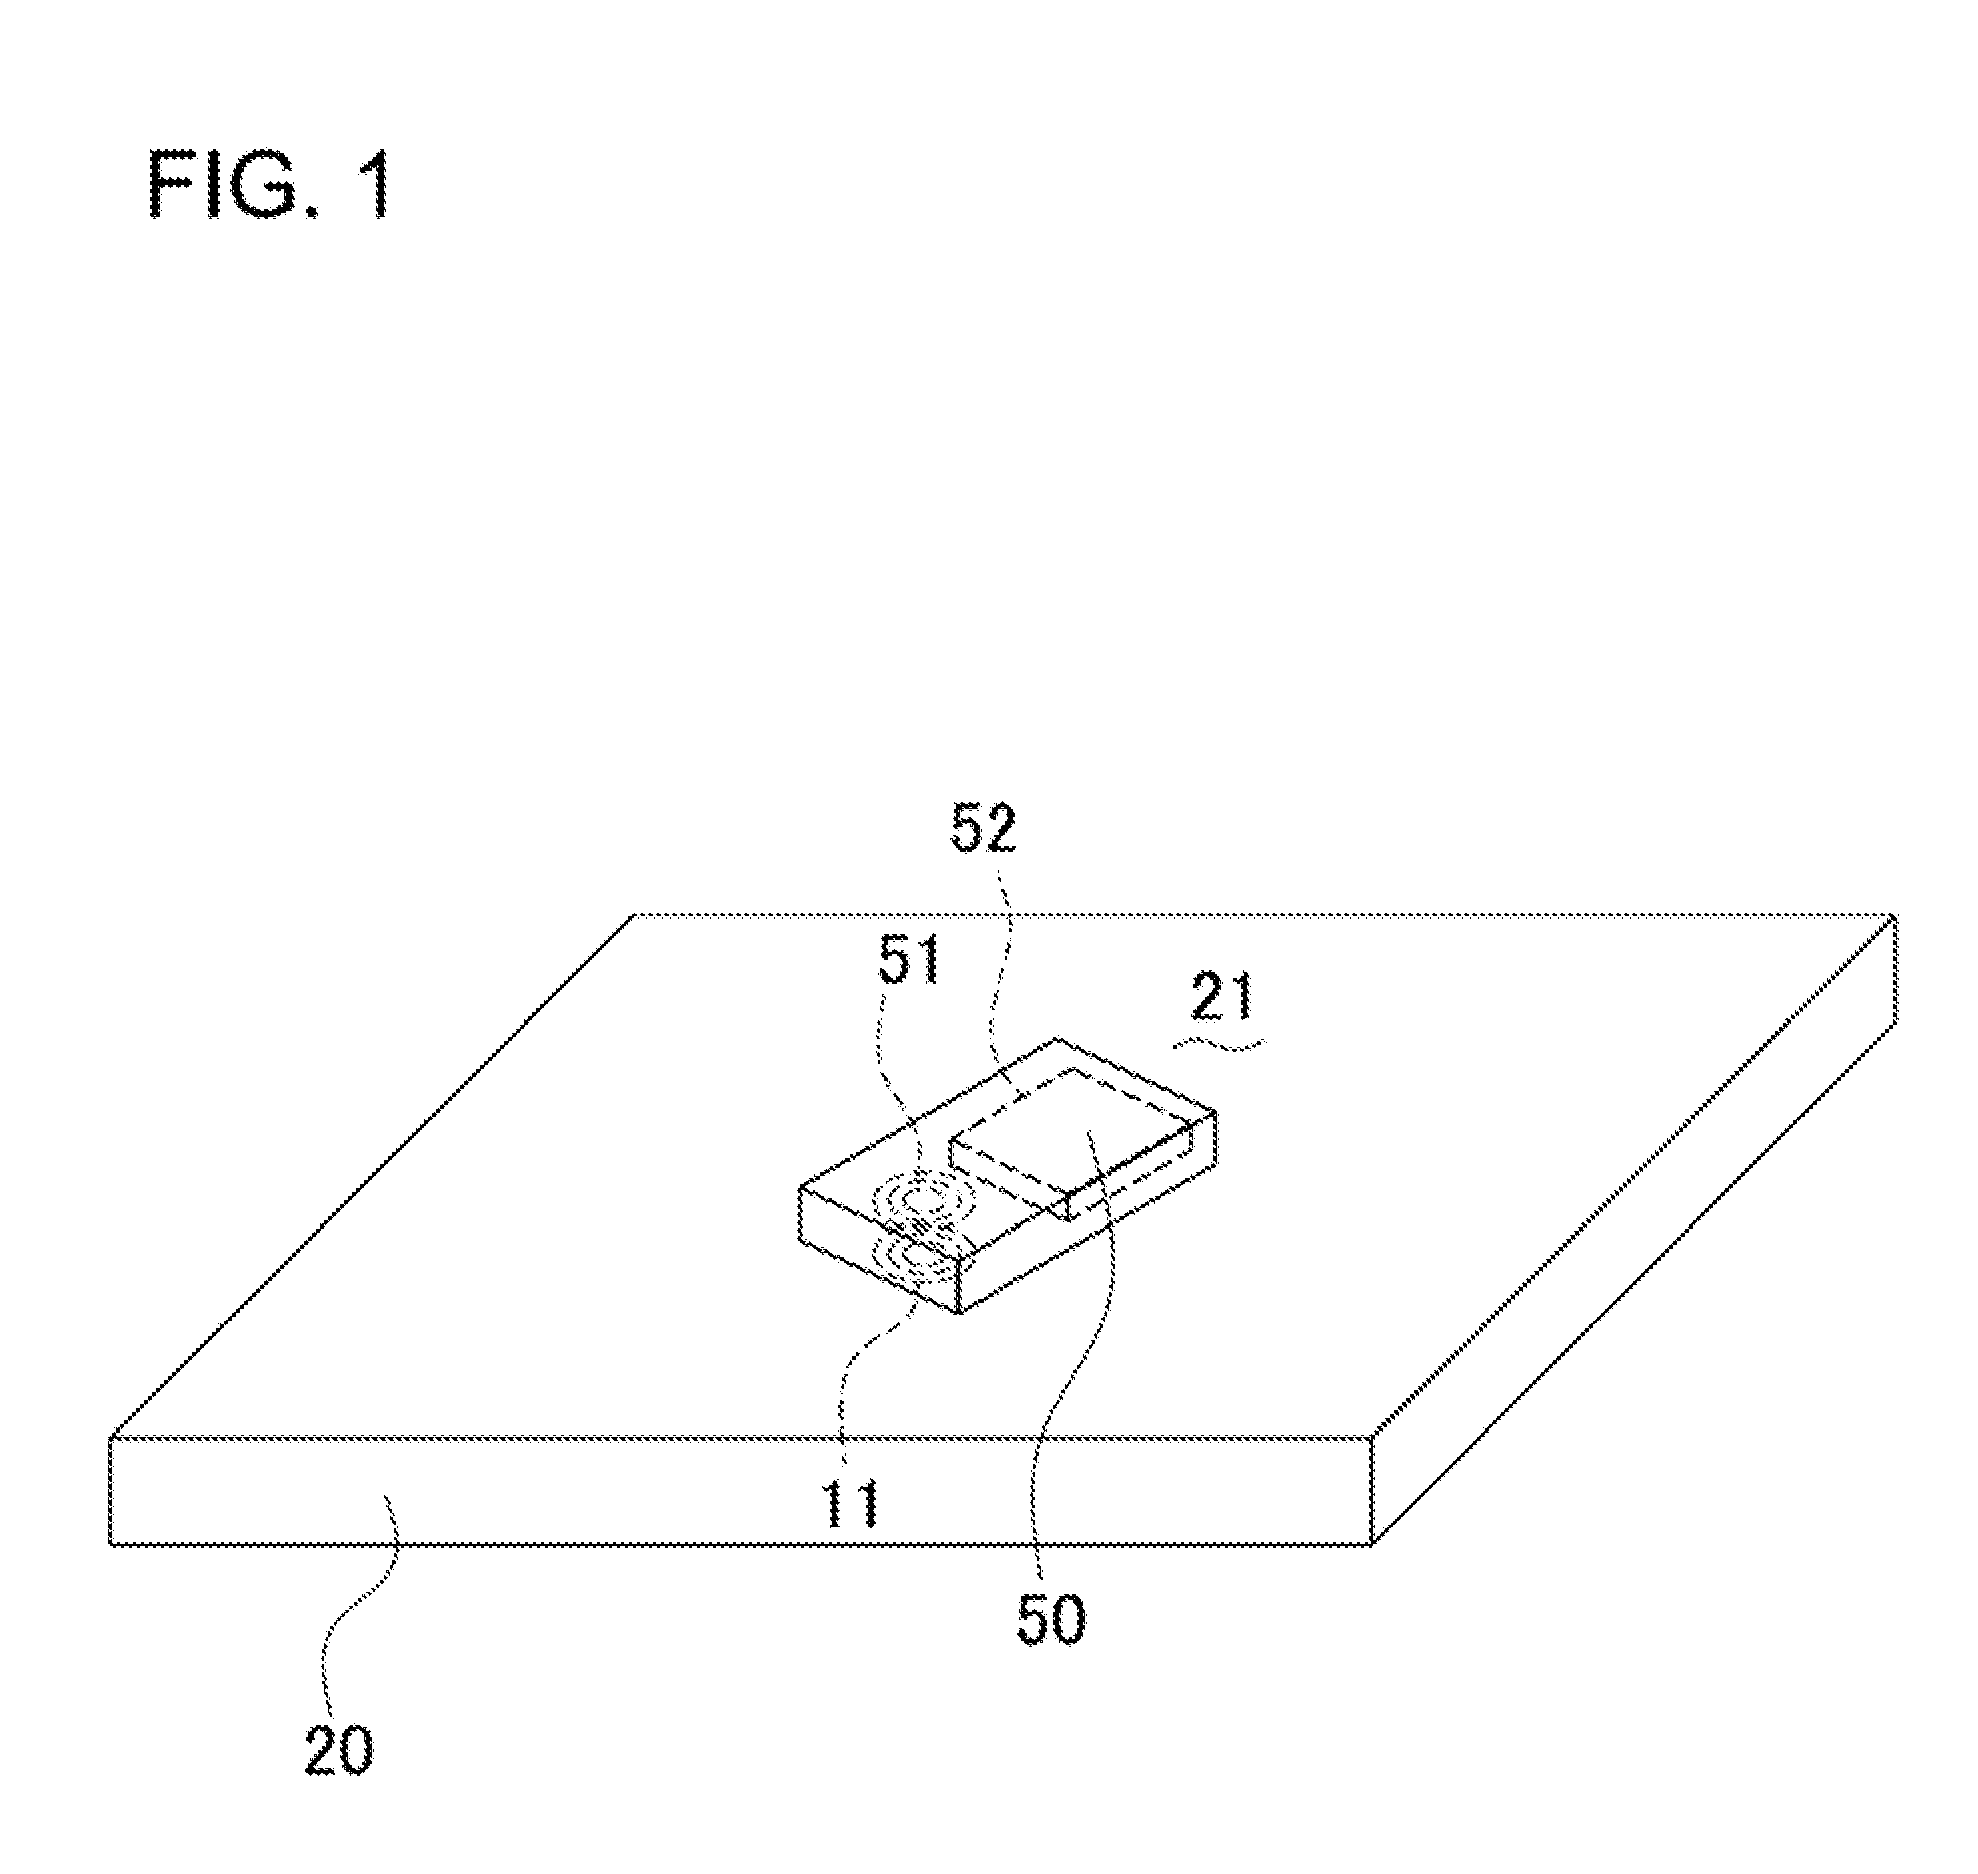 Charging system including a device housing a battery and charging pad